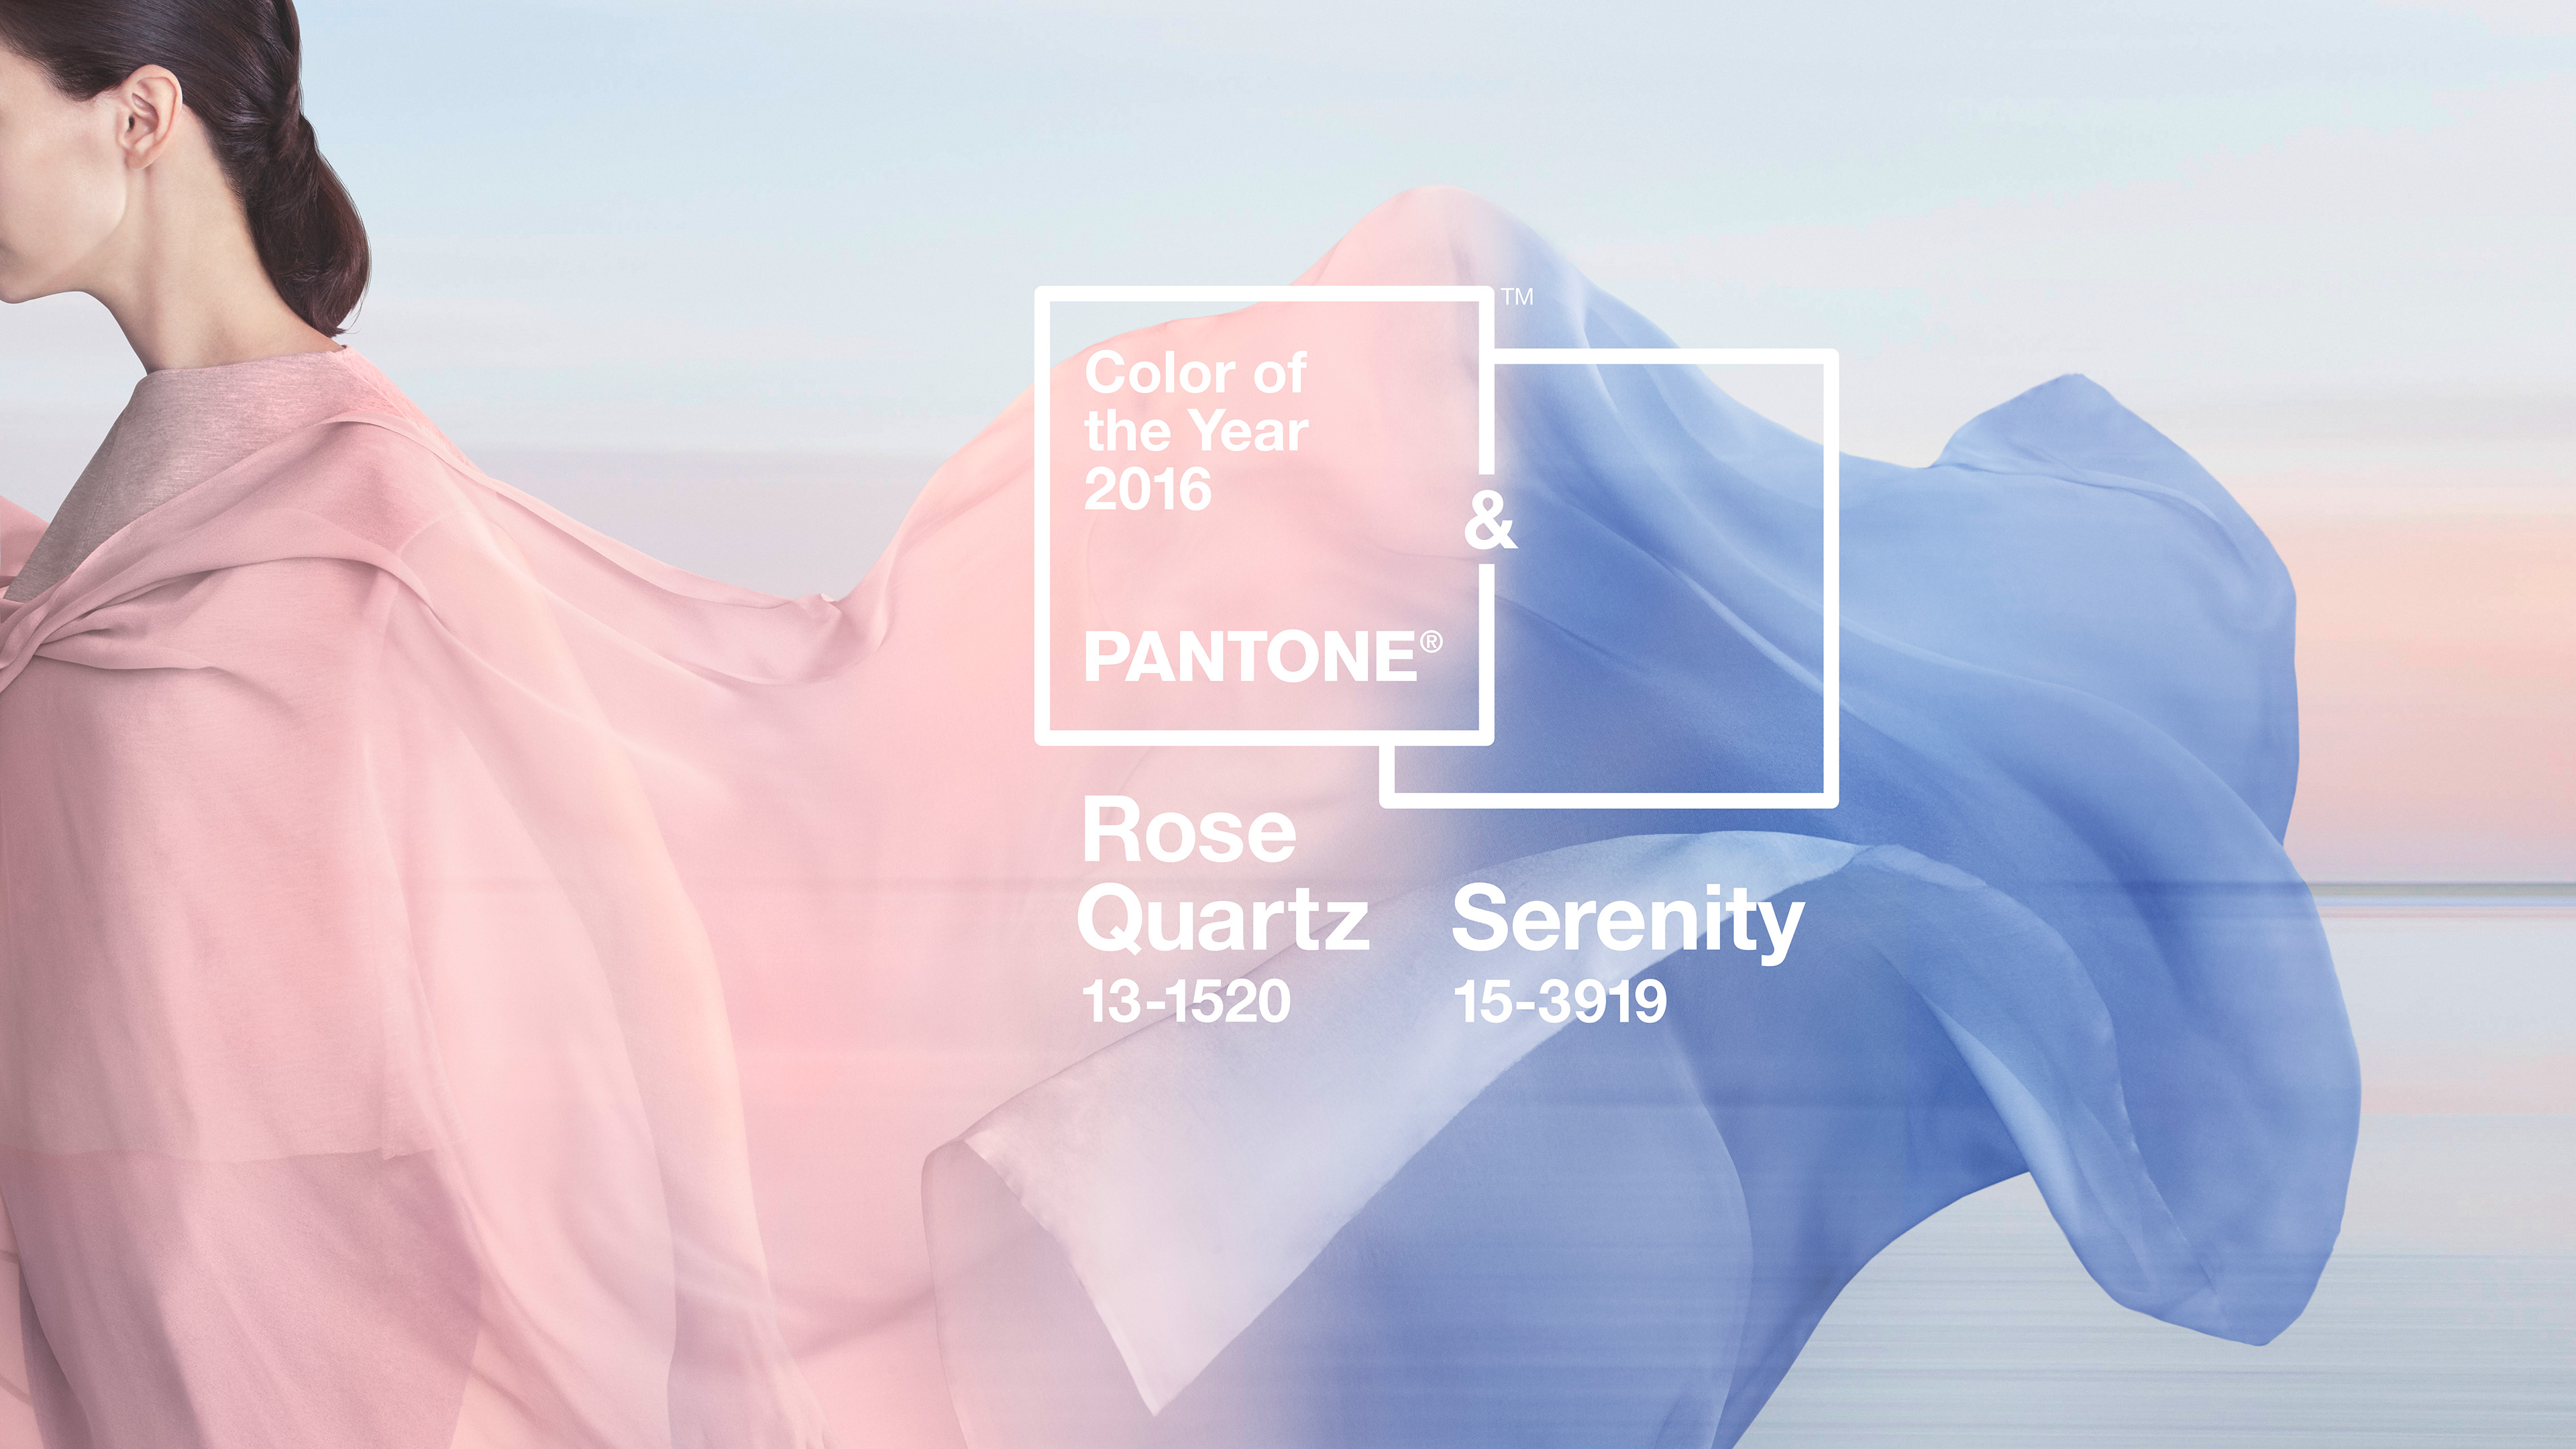 PANTONE Color of the Year 2016 